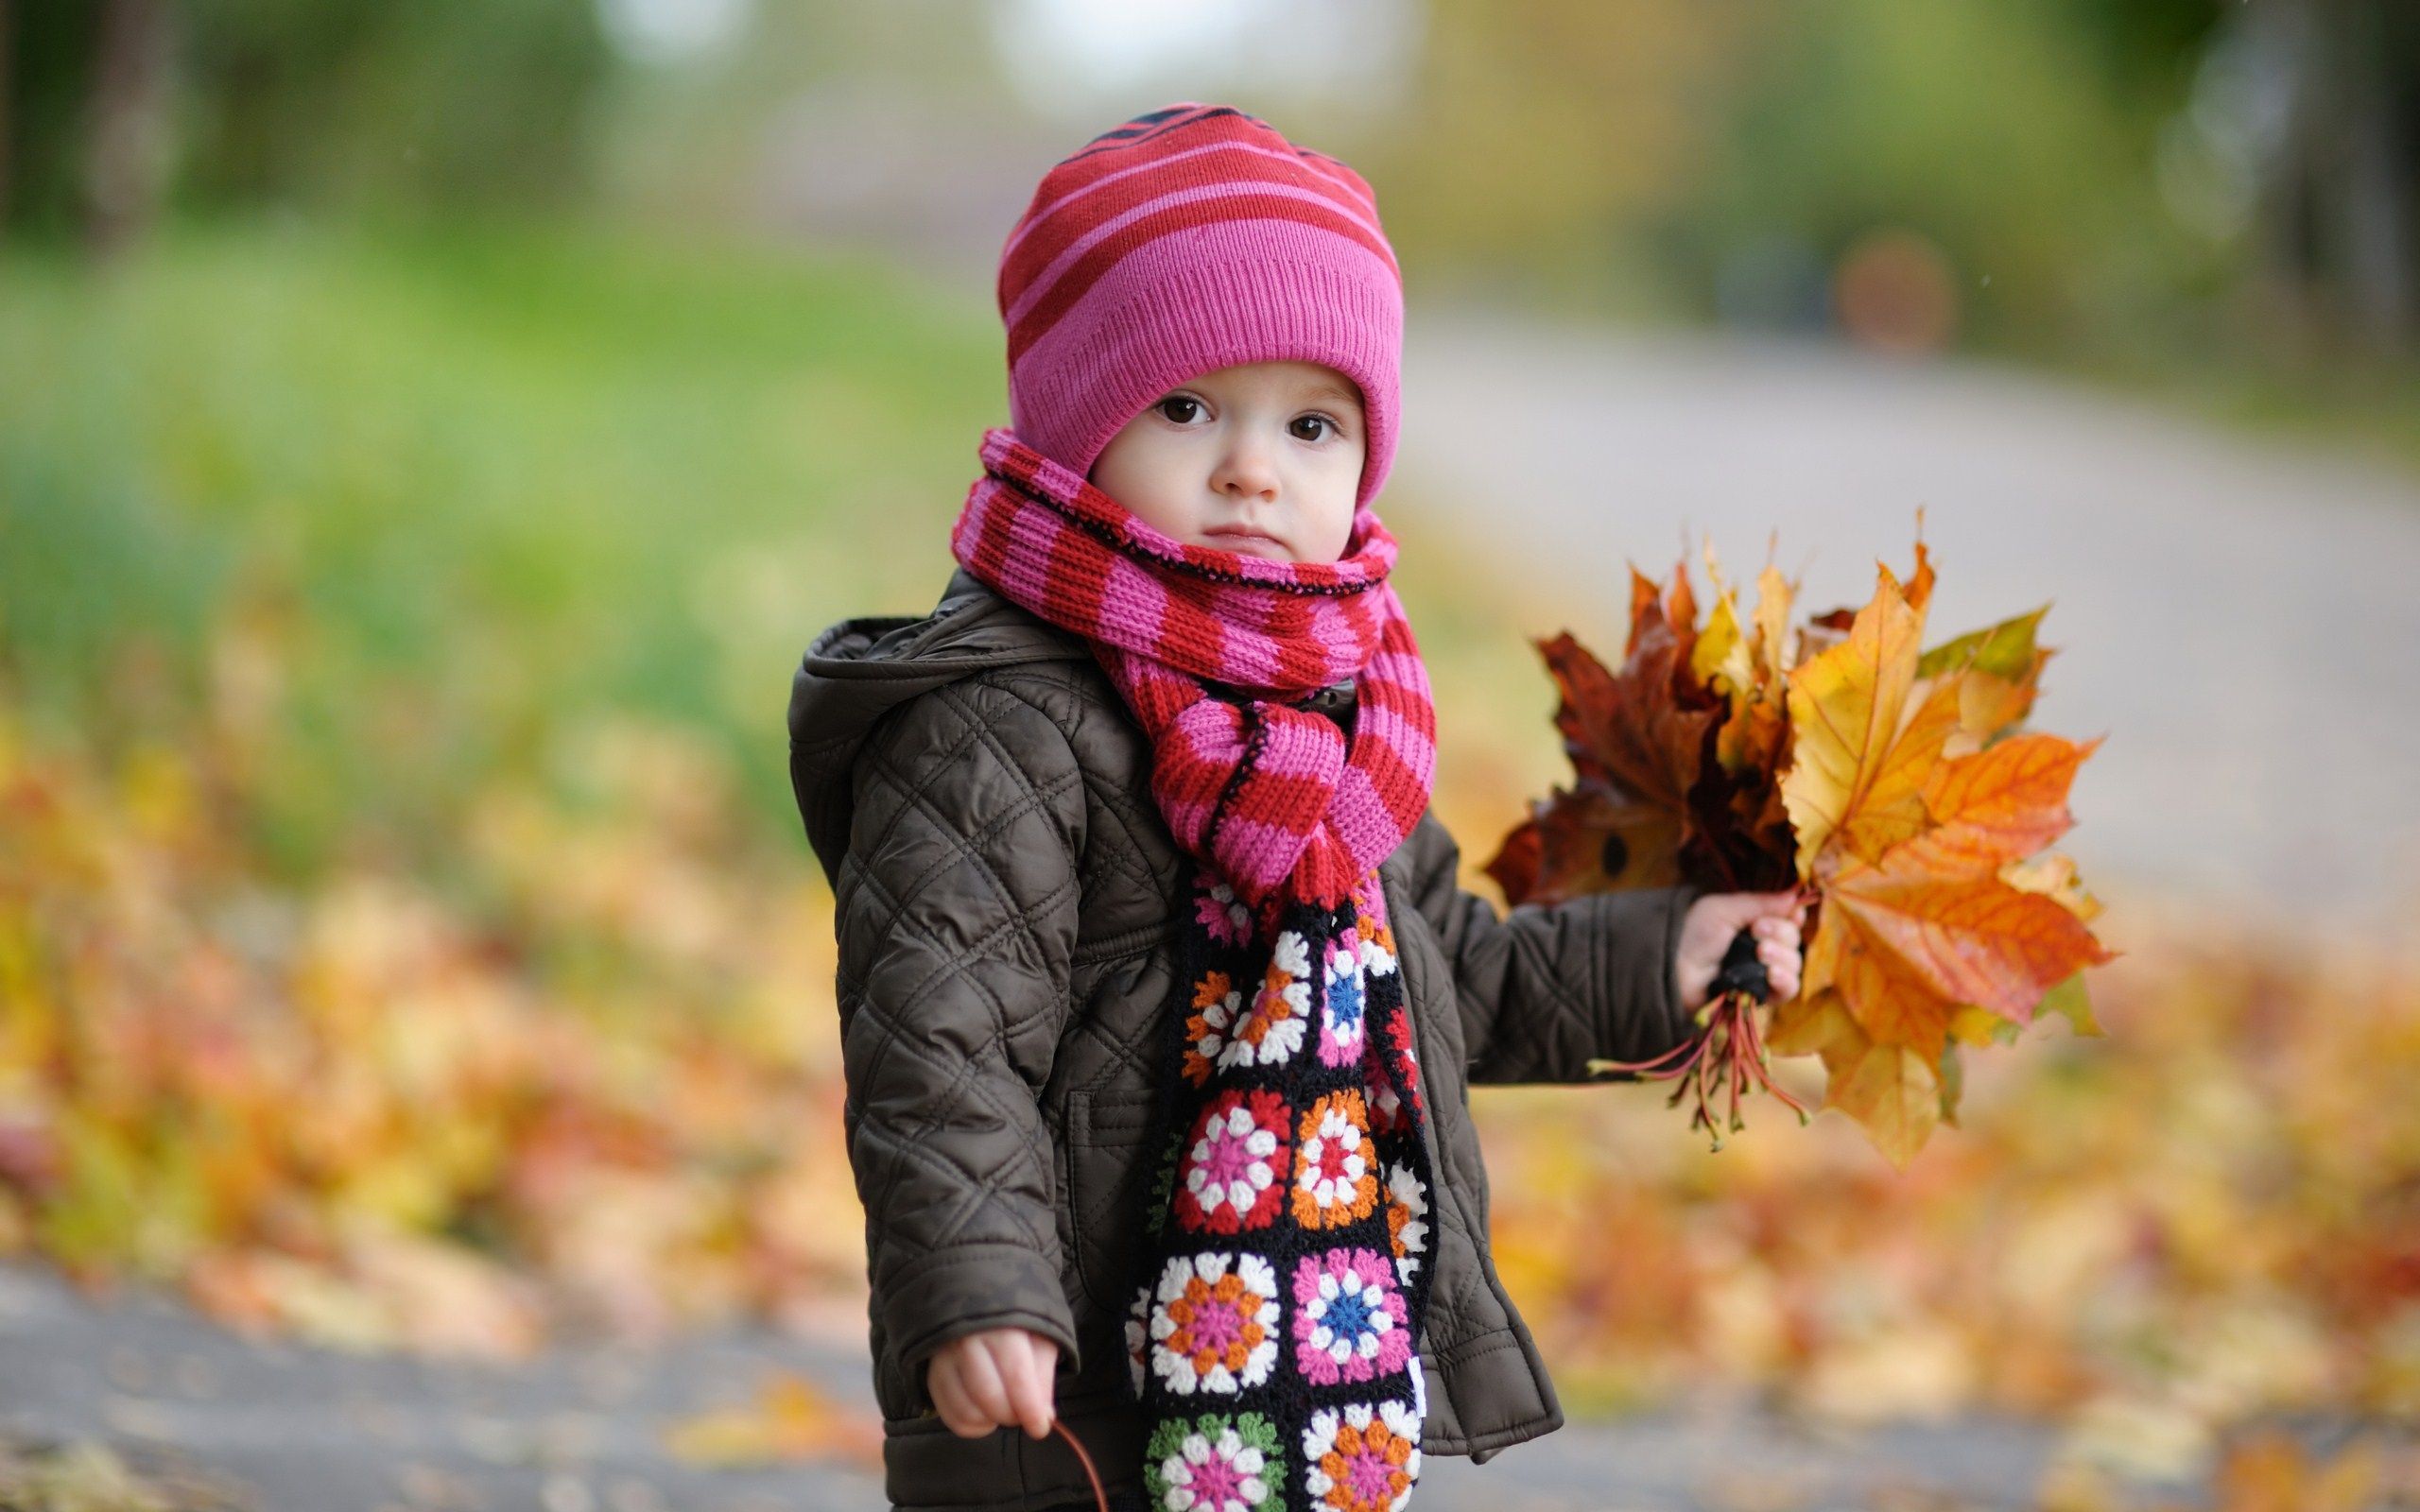 View Sweet Little Girl Child Autumn Leaves Photo HD Wallpaper